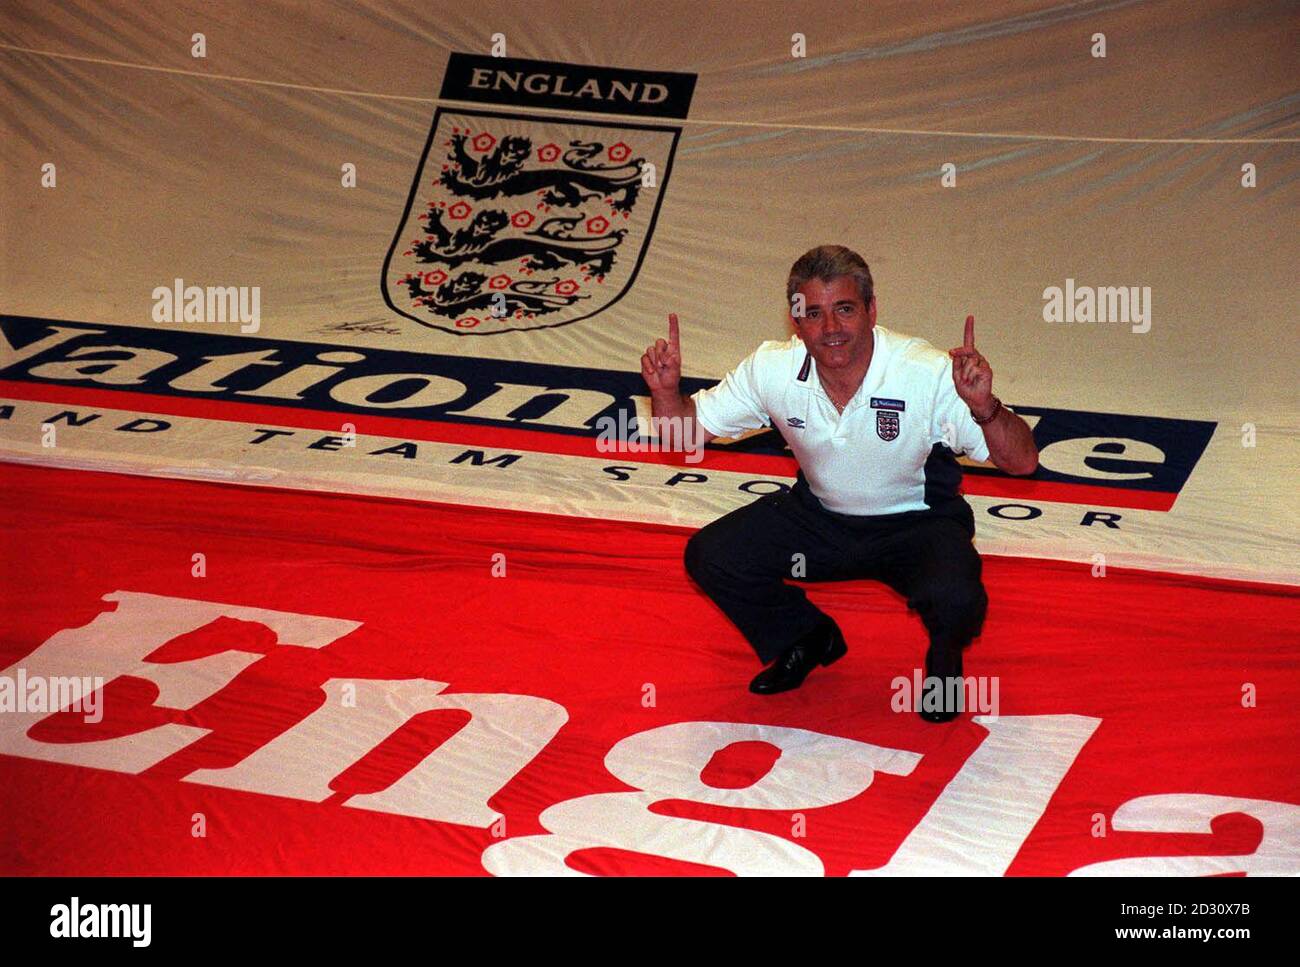 England coach Kevin Keegan made English football's biggest ever signing, which is set to play a key role in his team's quest for Euro 2000 glory when the tournament kicks off in Holland and Belgium.   *  The signing won't be measured in sterling but in fan's signatures on the world's largest football shirt measuring a giant 60ft x 60ft officially launched at the Hilton London Metropole Hotel, the England coach lent his support to the initiative and signed the shirt which will tour around the country, which is hoped will culminate in a record for the world's largest signed football shirt. Stock Photo